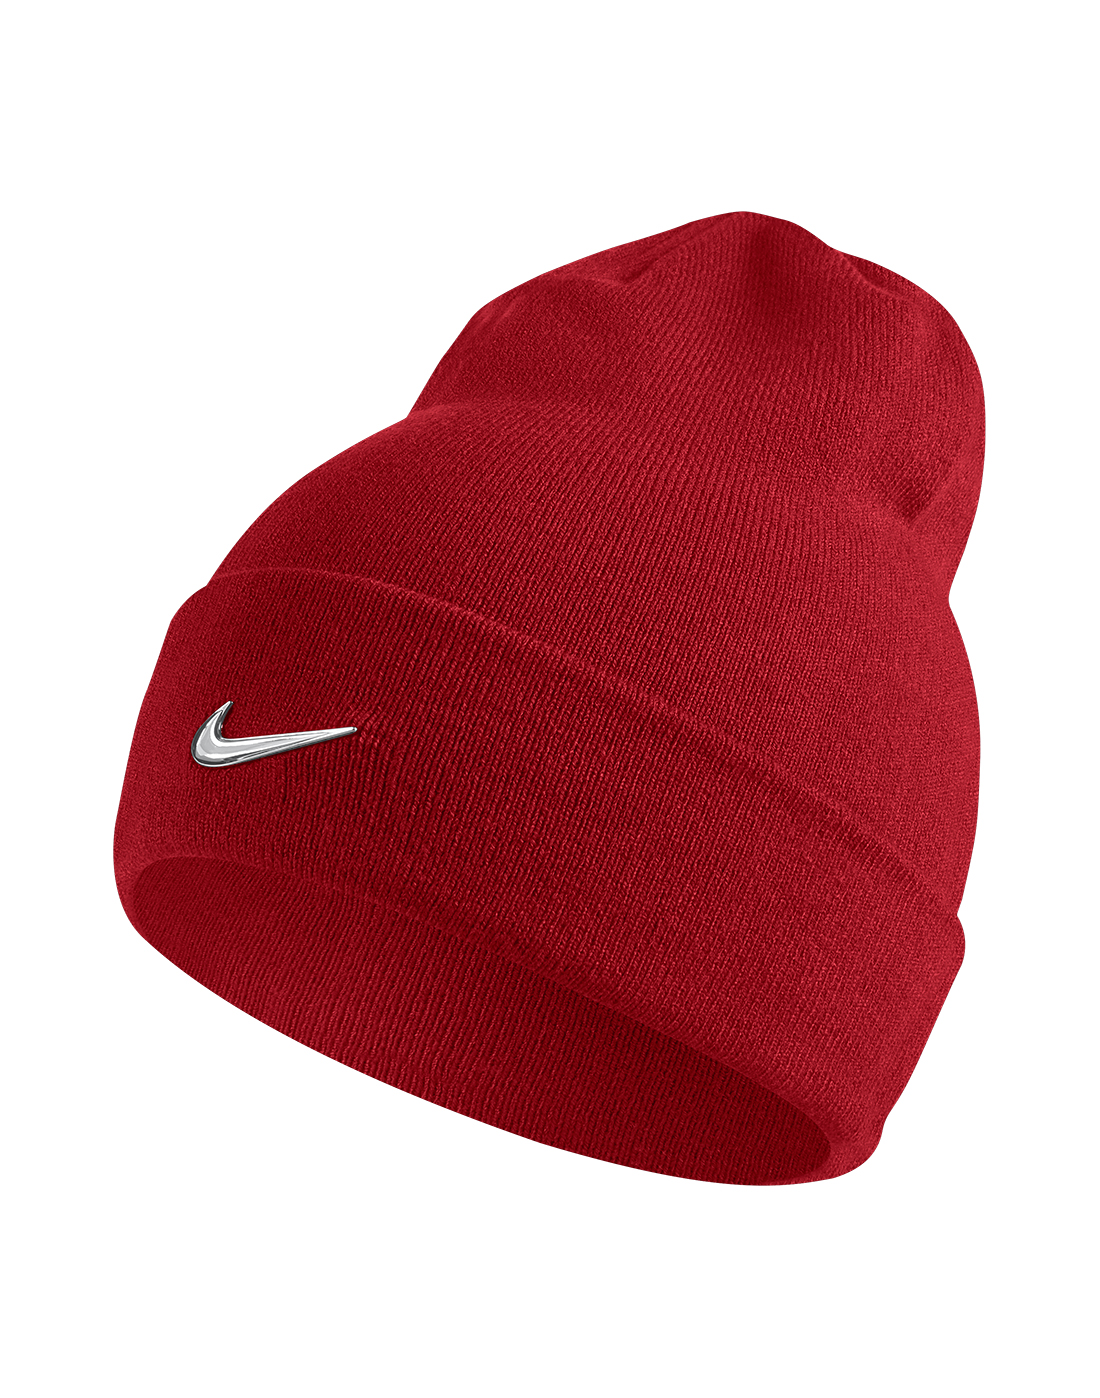 Nike Swoosh Woolly Hat - Red | Life Style Sports IE